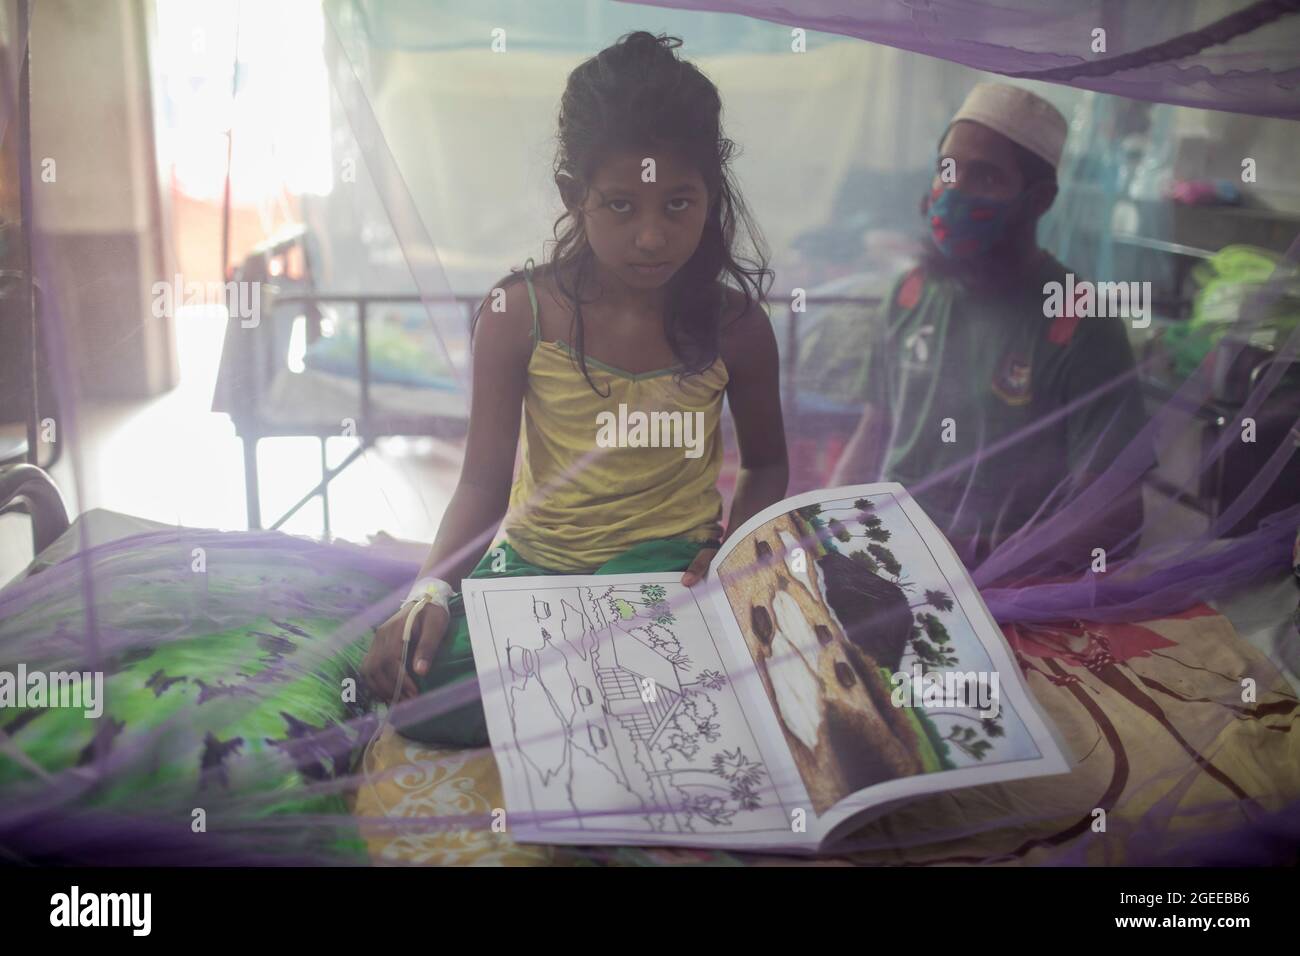 A child seen drawing cartoons inside a mosquito net during daytime at Children's Hospital.With Bangladesh grappling with the Covid-19 pandemic, dengue poses a great threat to the country's children. At present, severe dengue affects most Asian countries and has become a leading cause of hospitalizations and deaths among children as well as adults in these regions, according to WHO. In such dire circumstances, some Dhaka residents are lighting mosquito-repelling incenses even during the day to steer clear of the mosquito-borne viral disease. Stock Photo